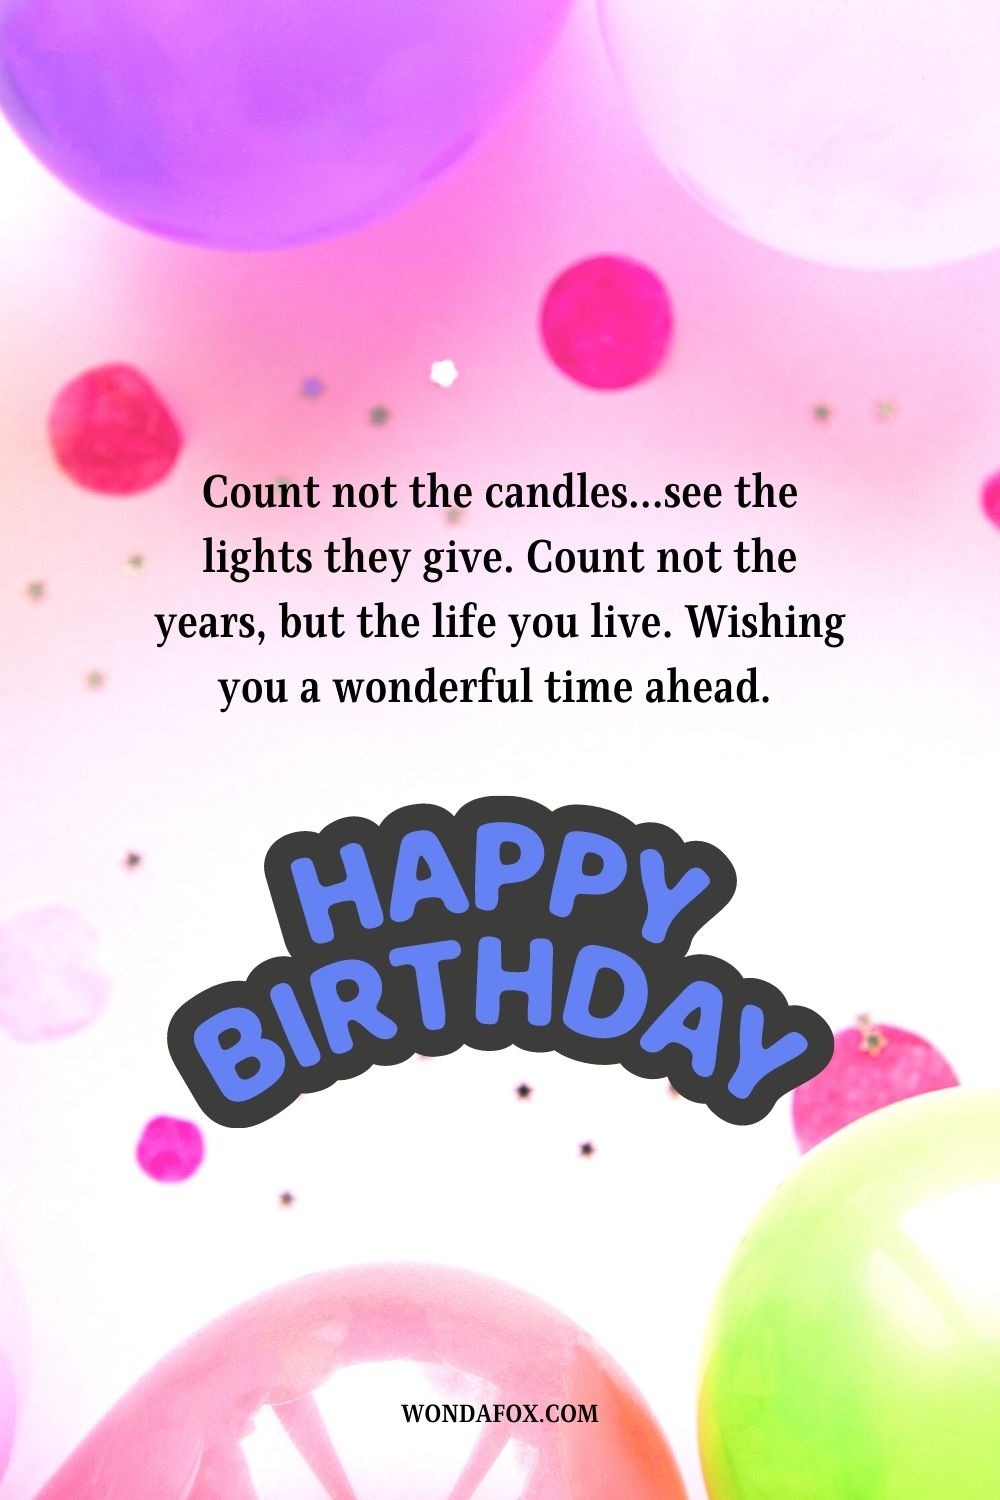 “Count not the candles…see the lights they give. Count not the years, but the life you live. Wishing you a wonderful time ahead. Happy birthday.”